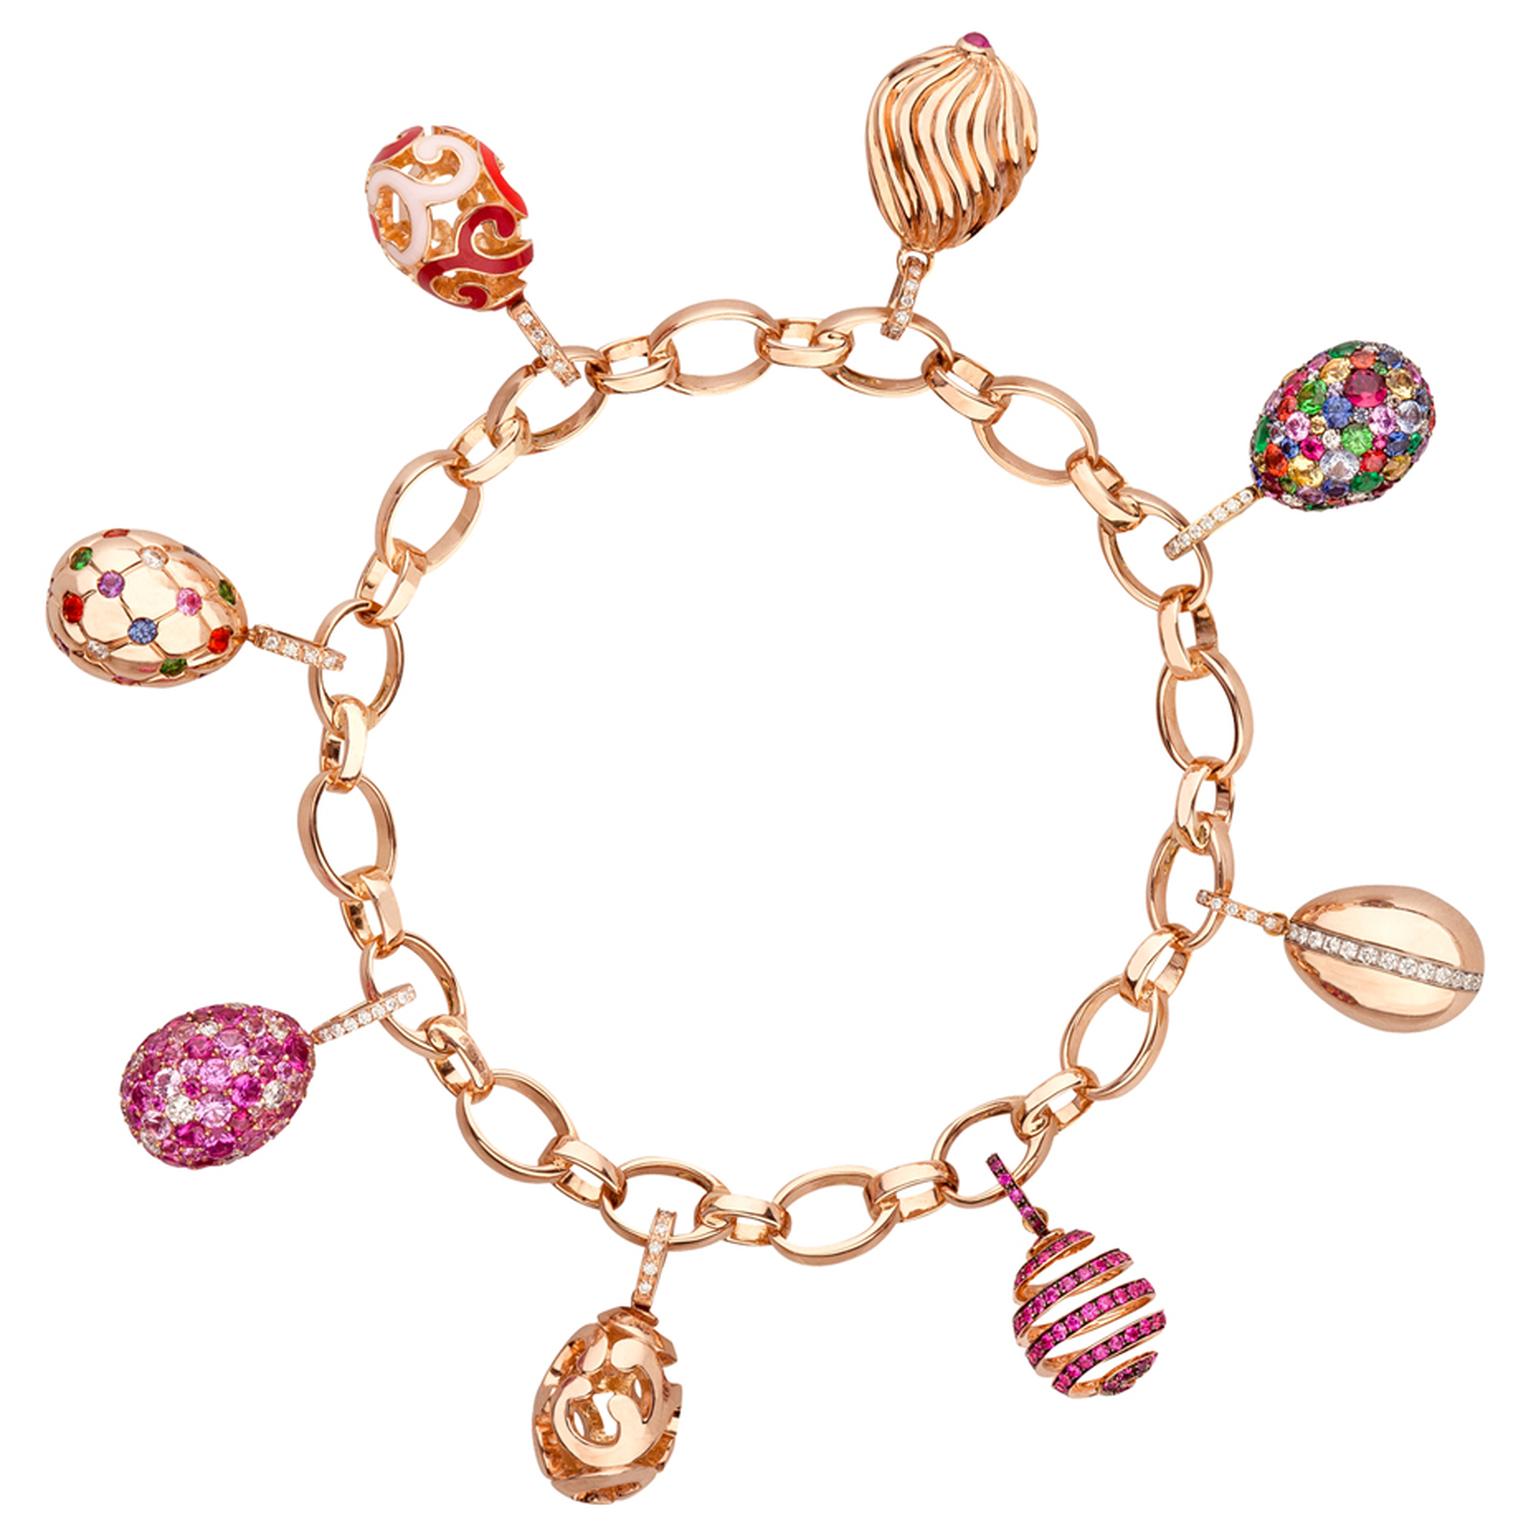 Fabergé rose gold charm bracelet featuring sapphires, amethysts, diamonds, enamel and other coloured gemstones.